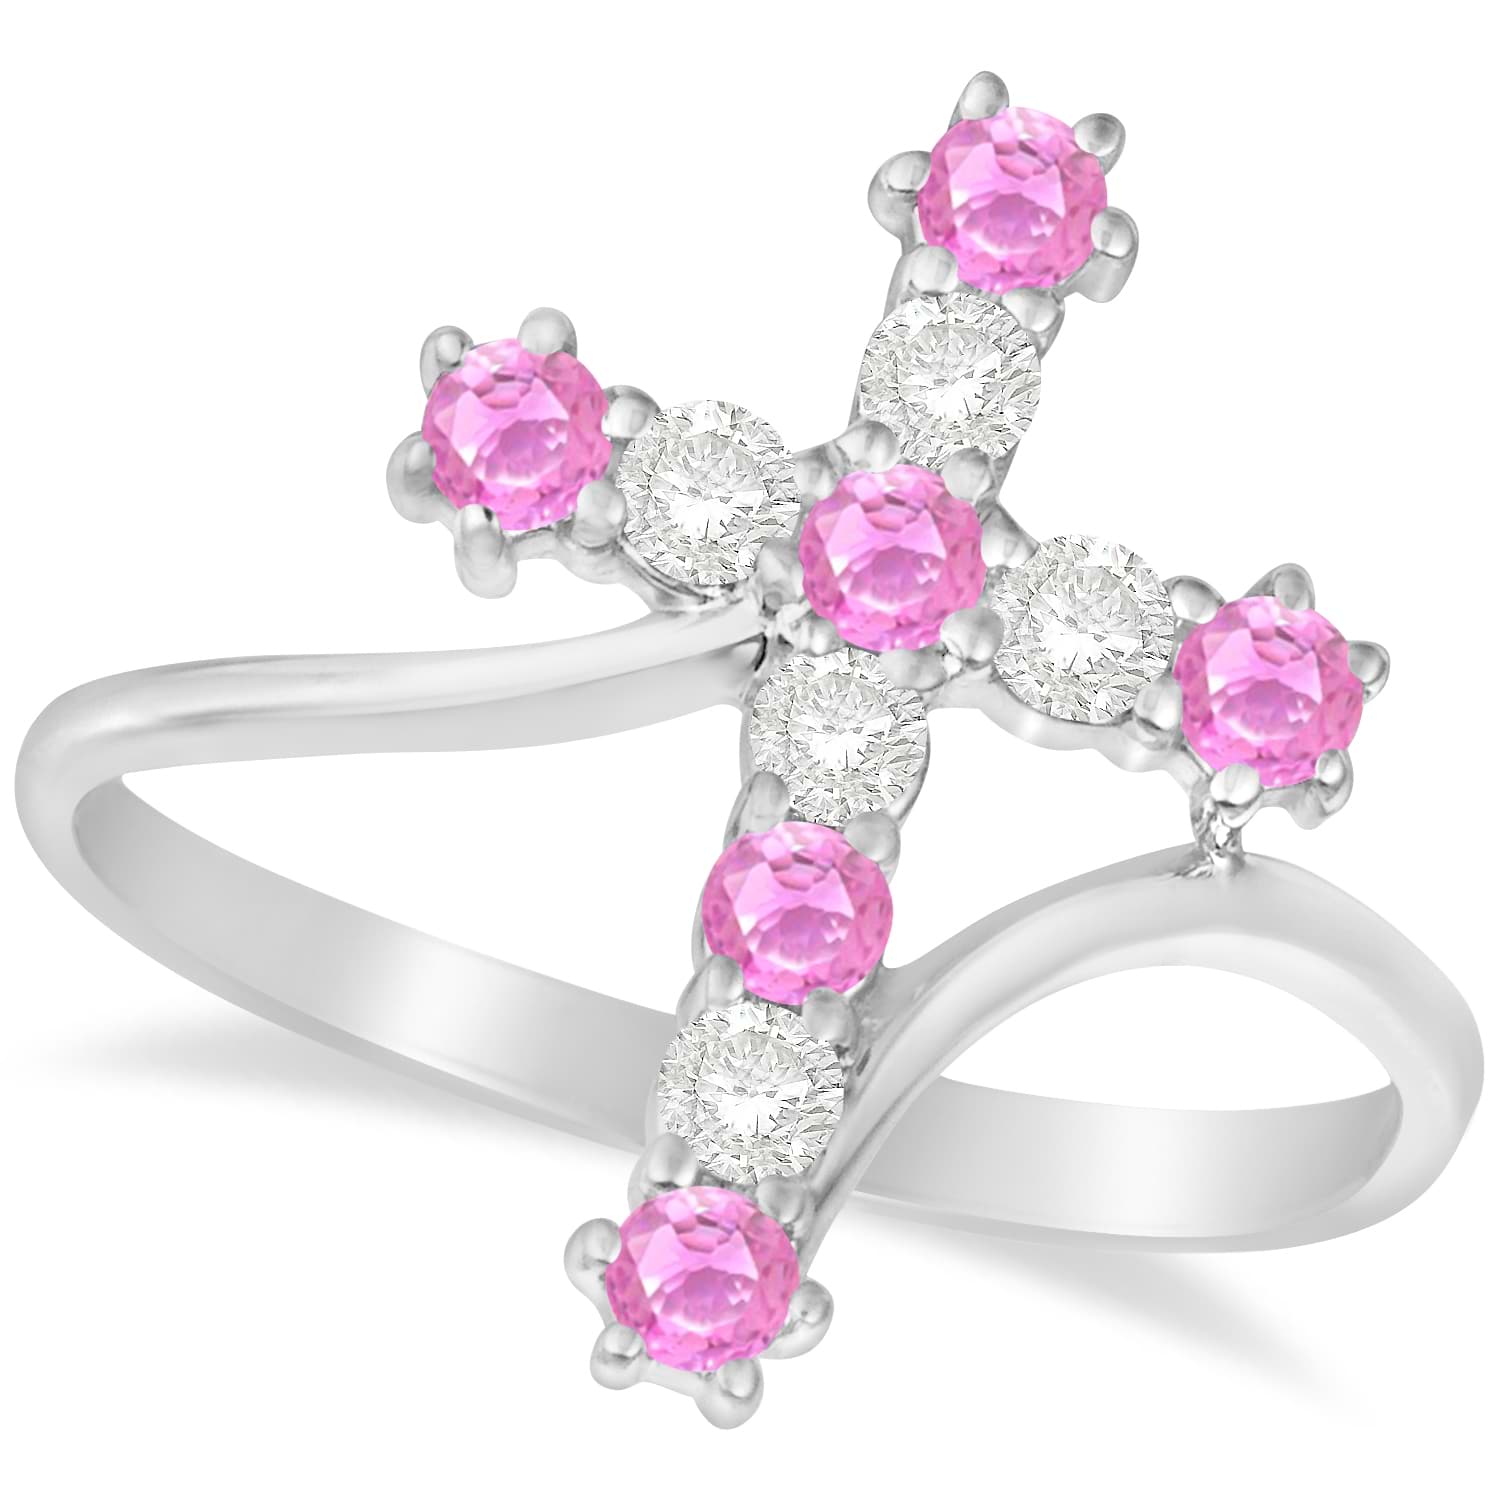 Diamond & Pink Sapphire Religious Cross Twisted Ring 14k White Gold (0.51ct)